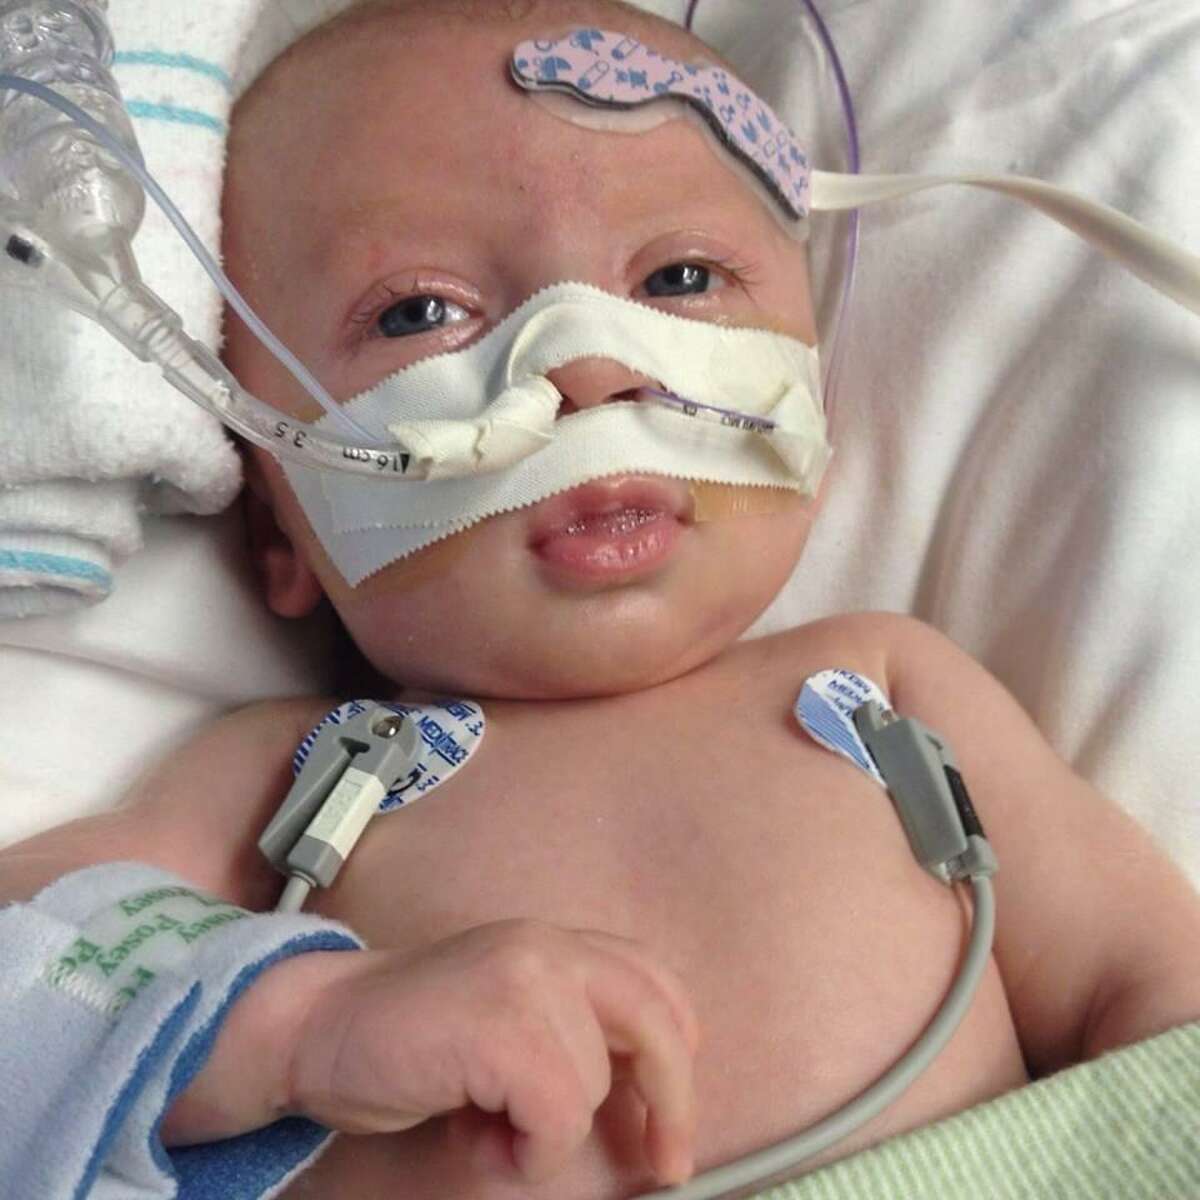 Jaxson Britt was born on Aug. 12 and since then, has remained at Texas Children's Hospital awaiting a heart transplant. A benefit is being held to cover medical expenses on Nov. 23.